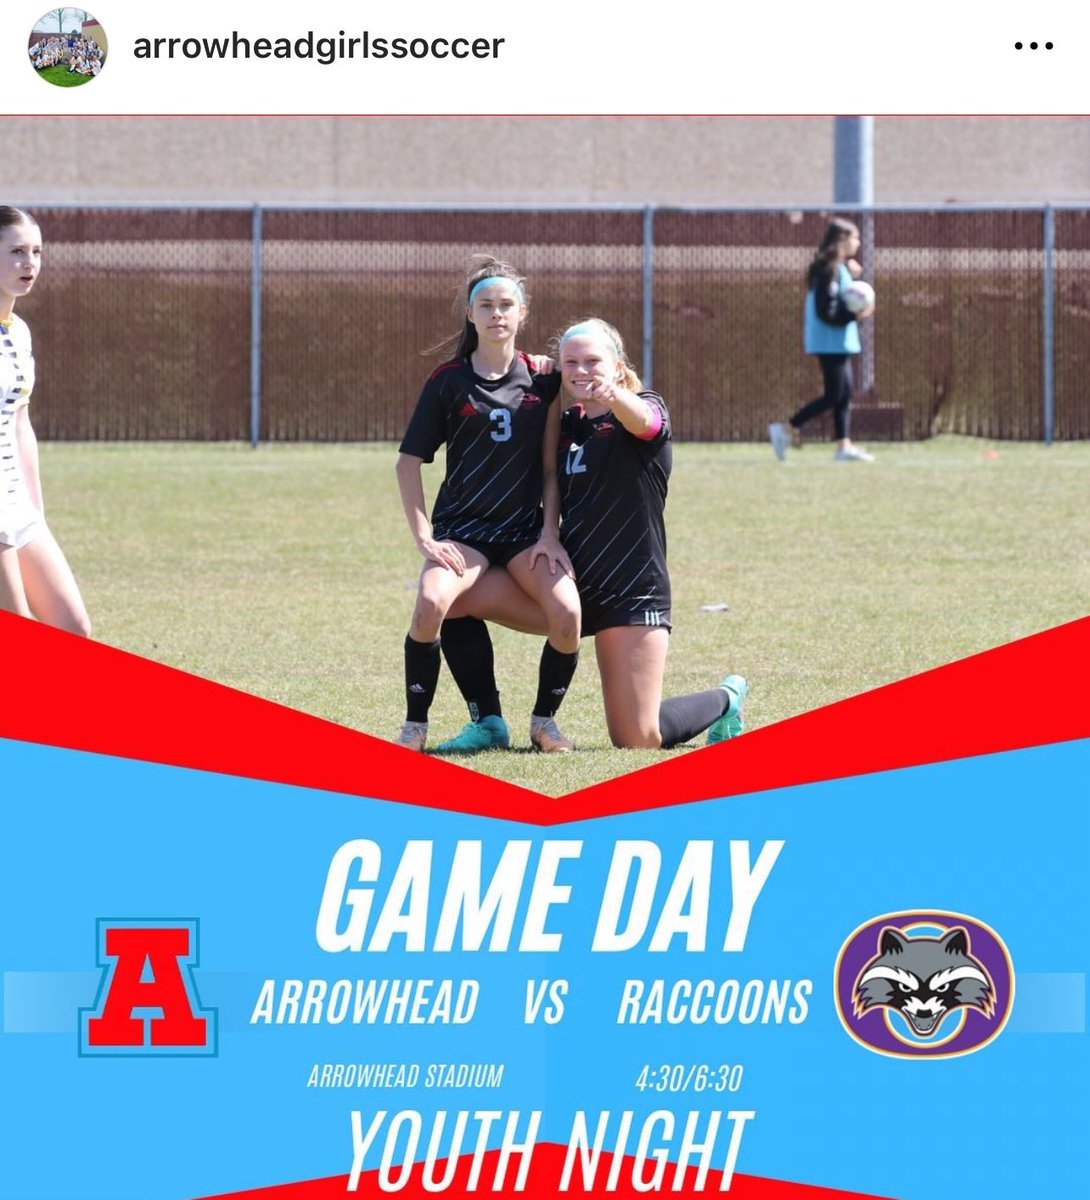 GAME DAY⚽️‼️

🆚 Oconomowoc 
🗓️Today, Tuesday, May 7th
⏰  6:30 kickoff 
📍Arrowhead HS

@AHSGsoccer @PrepSoccer @ImYouthSoccer @ImCollegeSoccer @WisconsinSoccer @wiaawi @wissportsnet @MaxPreps